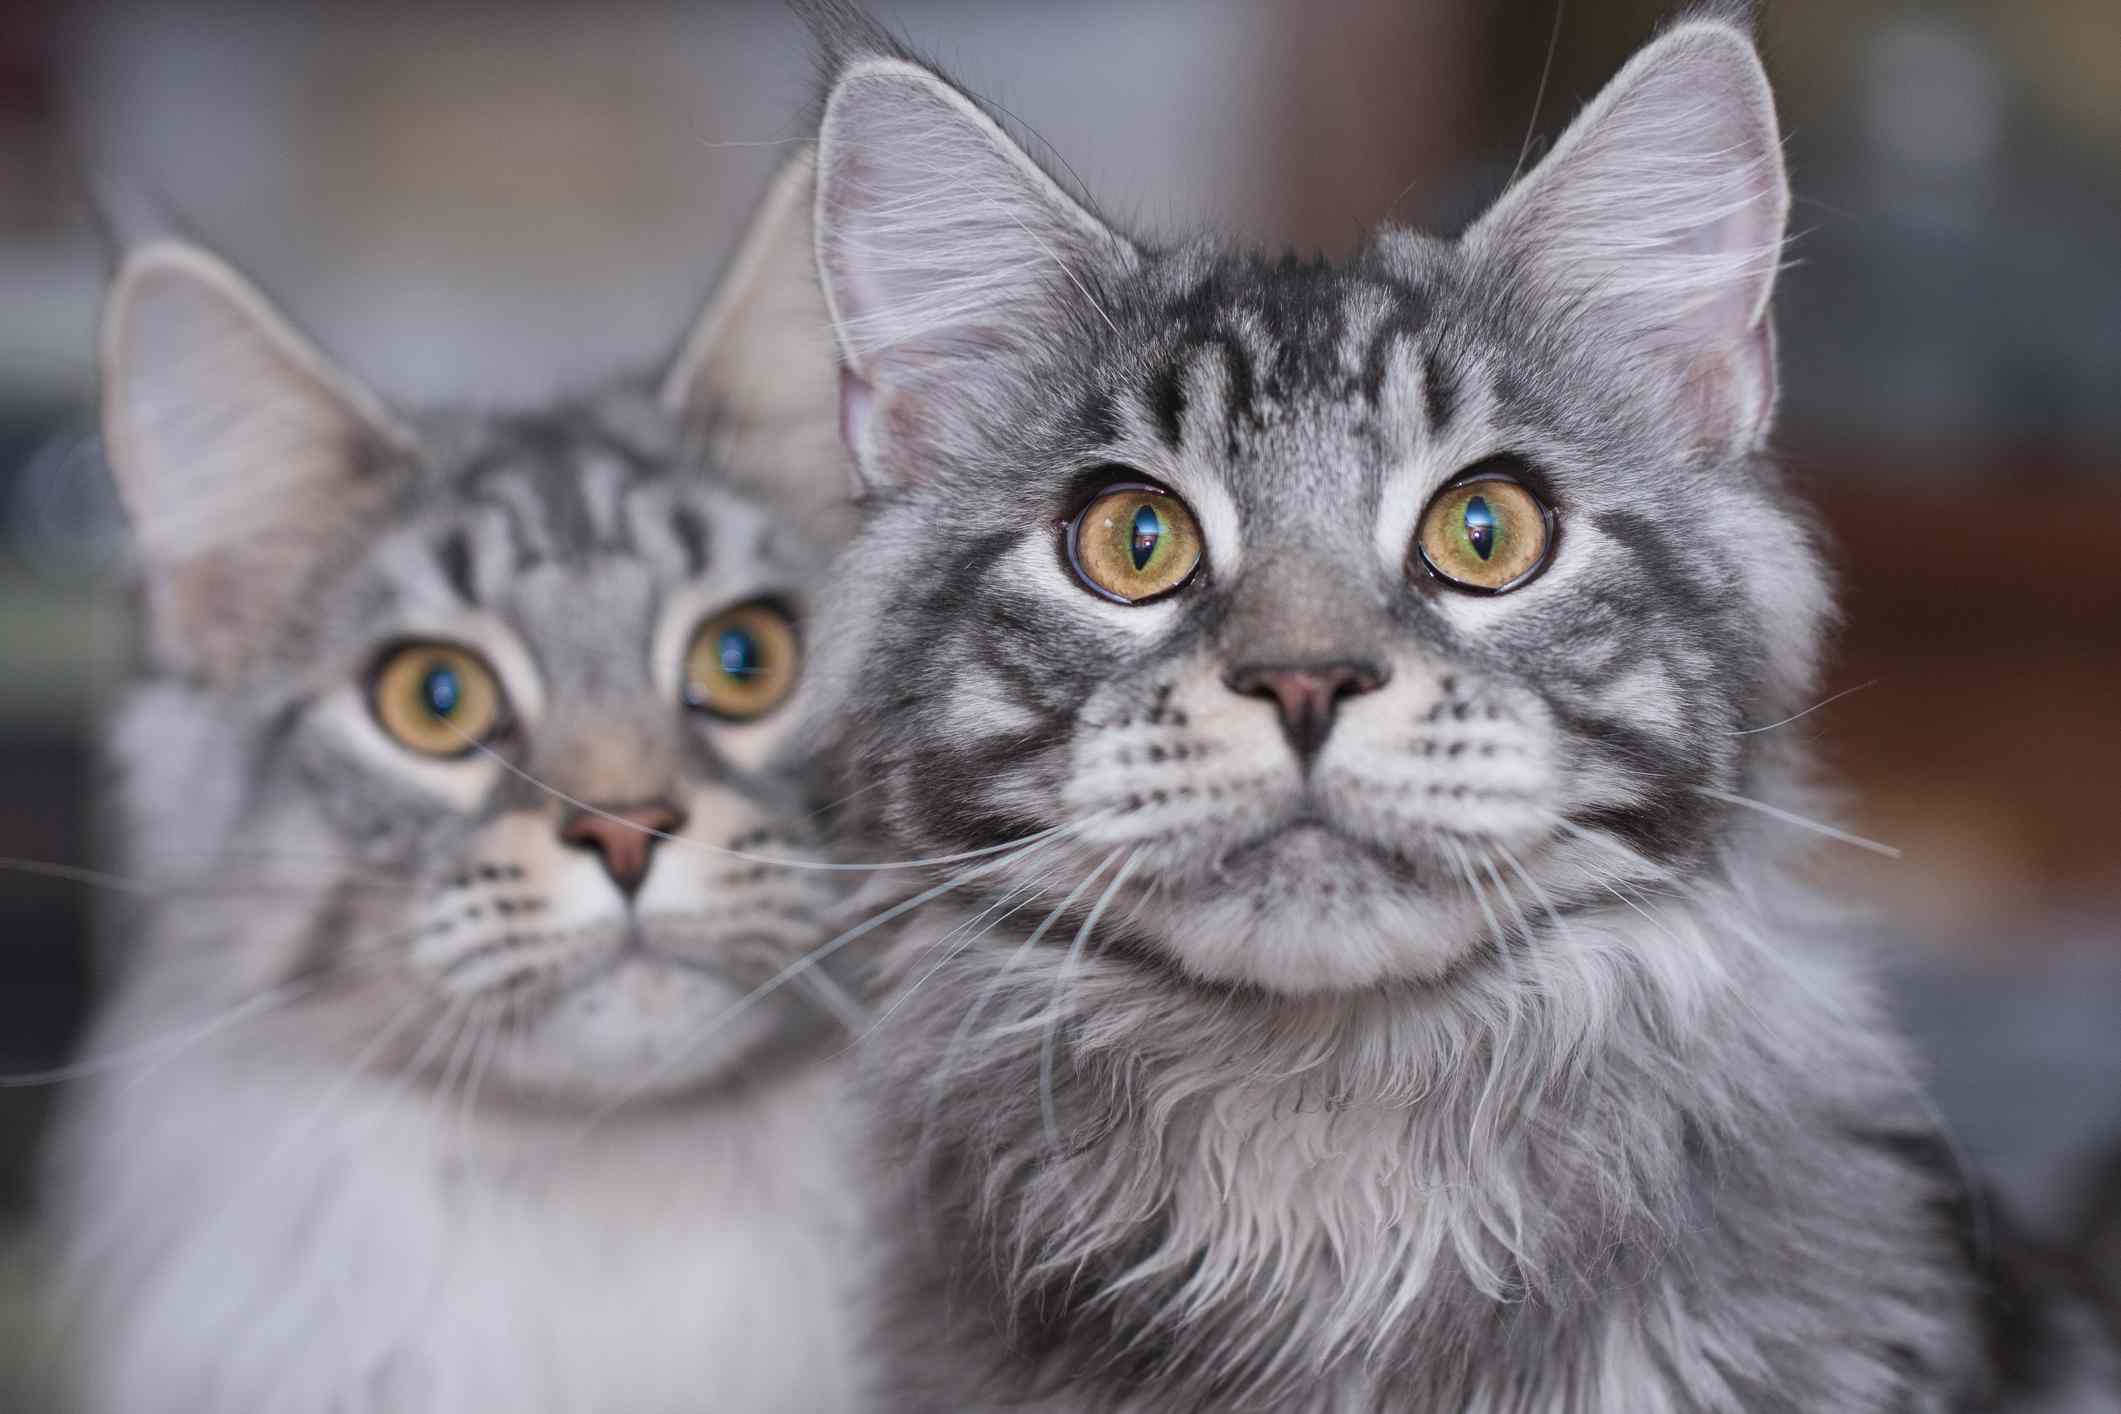 Two Maine Coon cats looking into the camera.